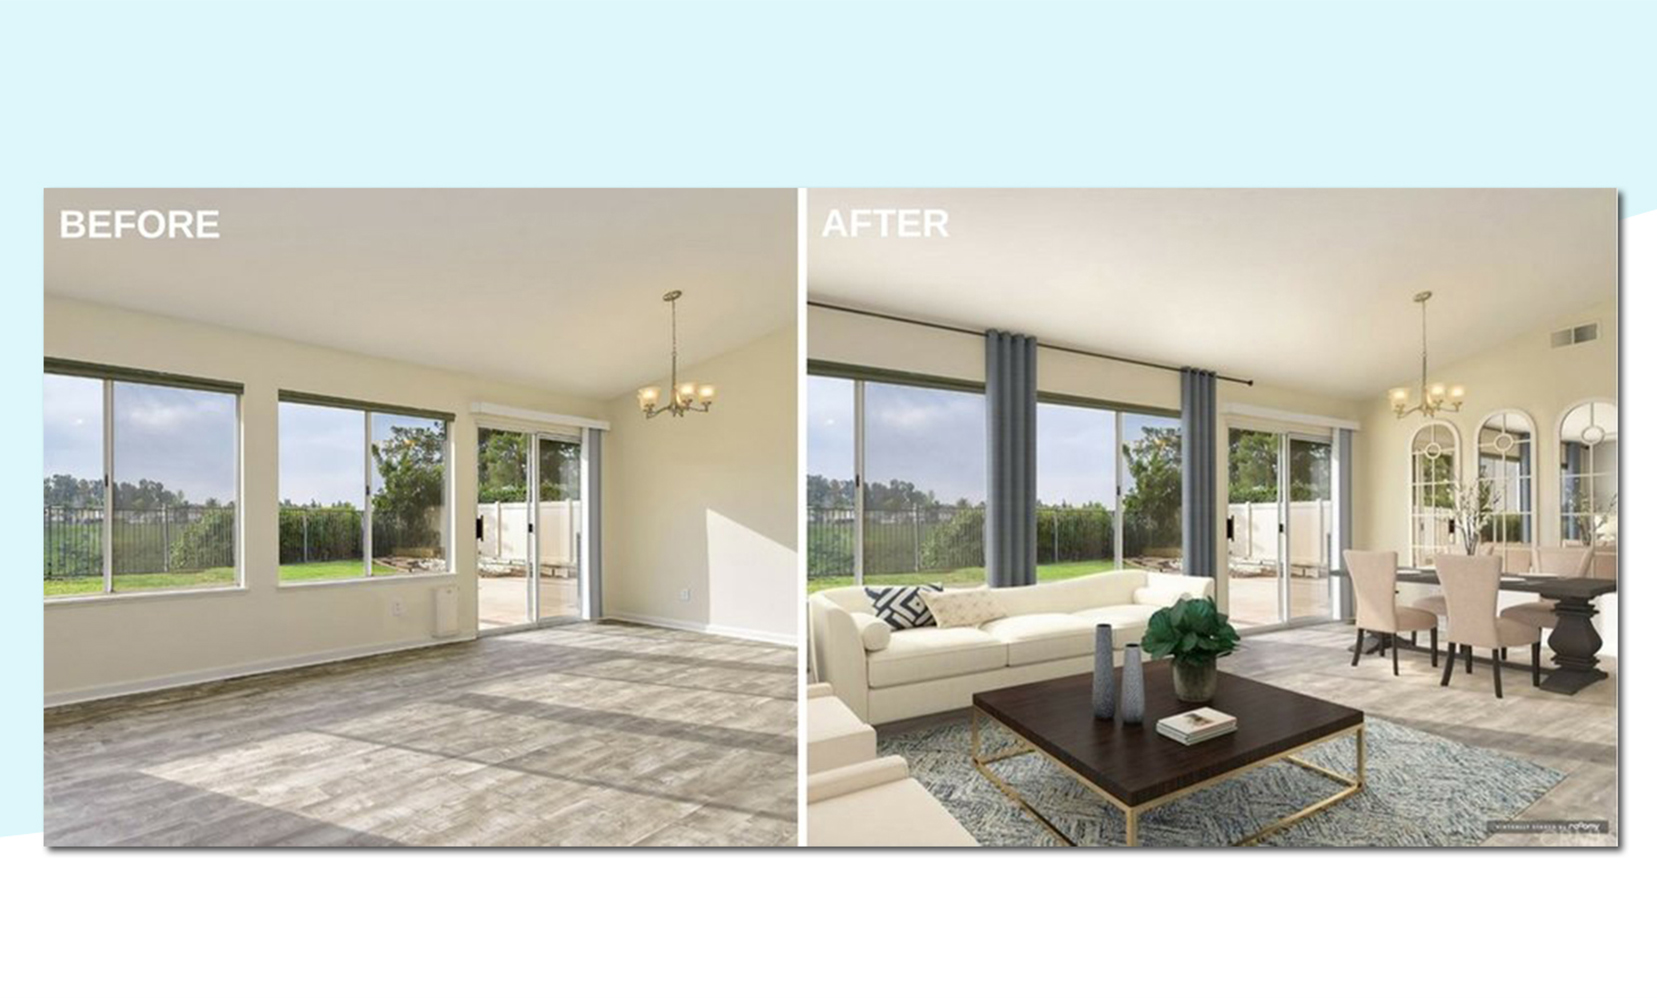 Why choose virtual staging?